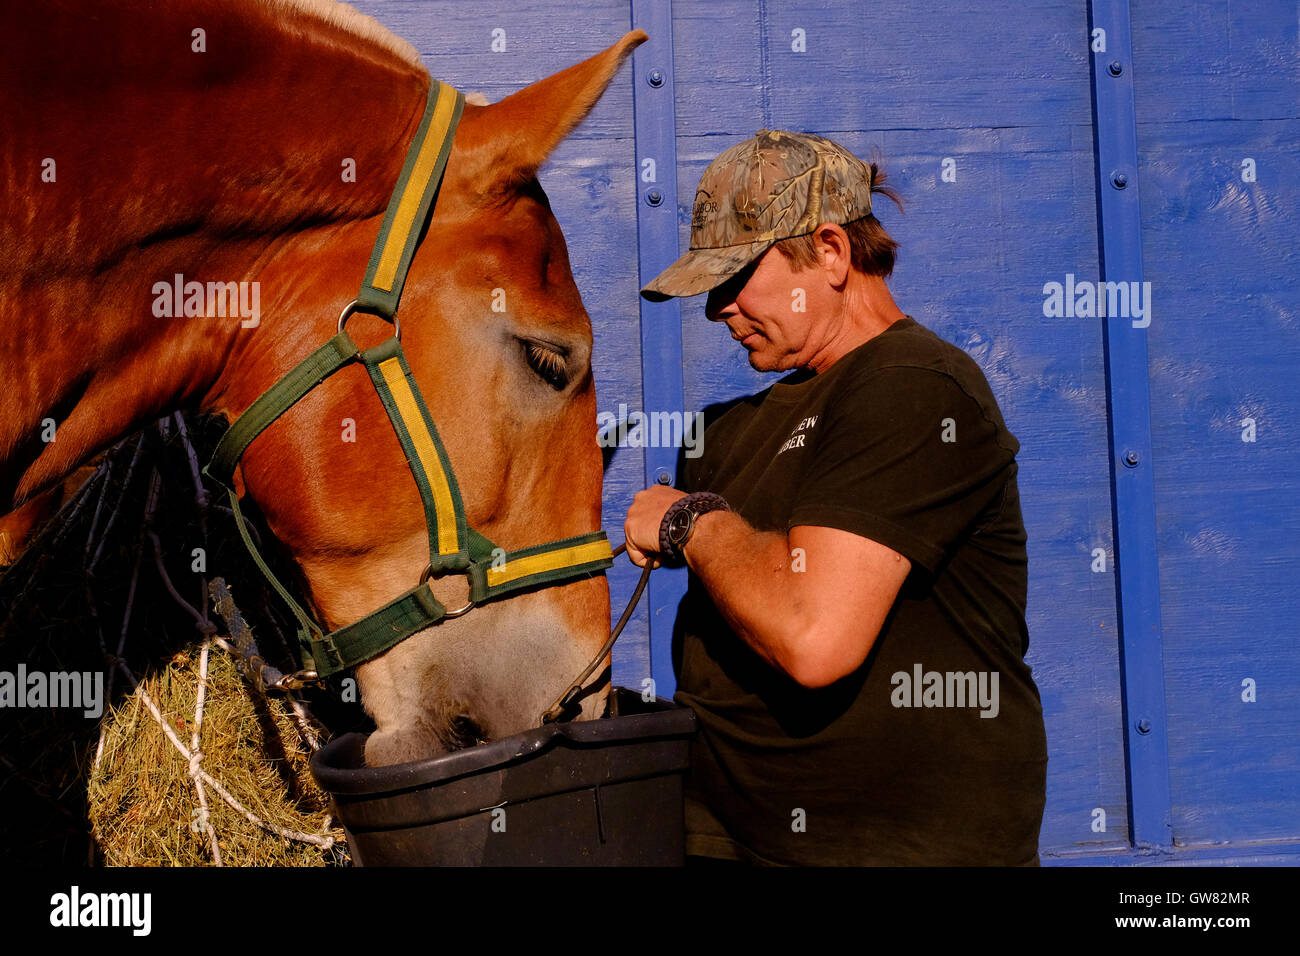 Man in cap feeds a beautiful horse prior to a competition at a county fair Stock Photo